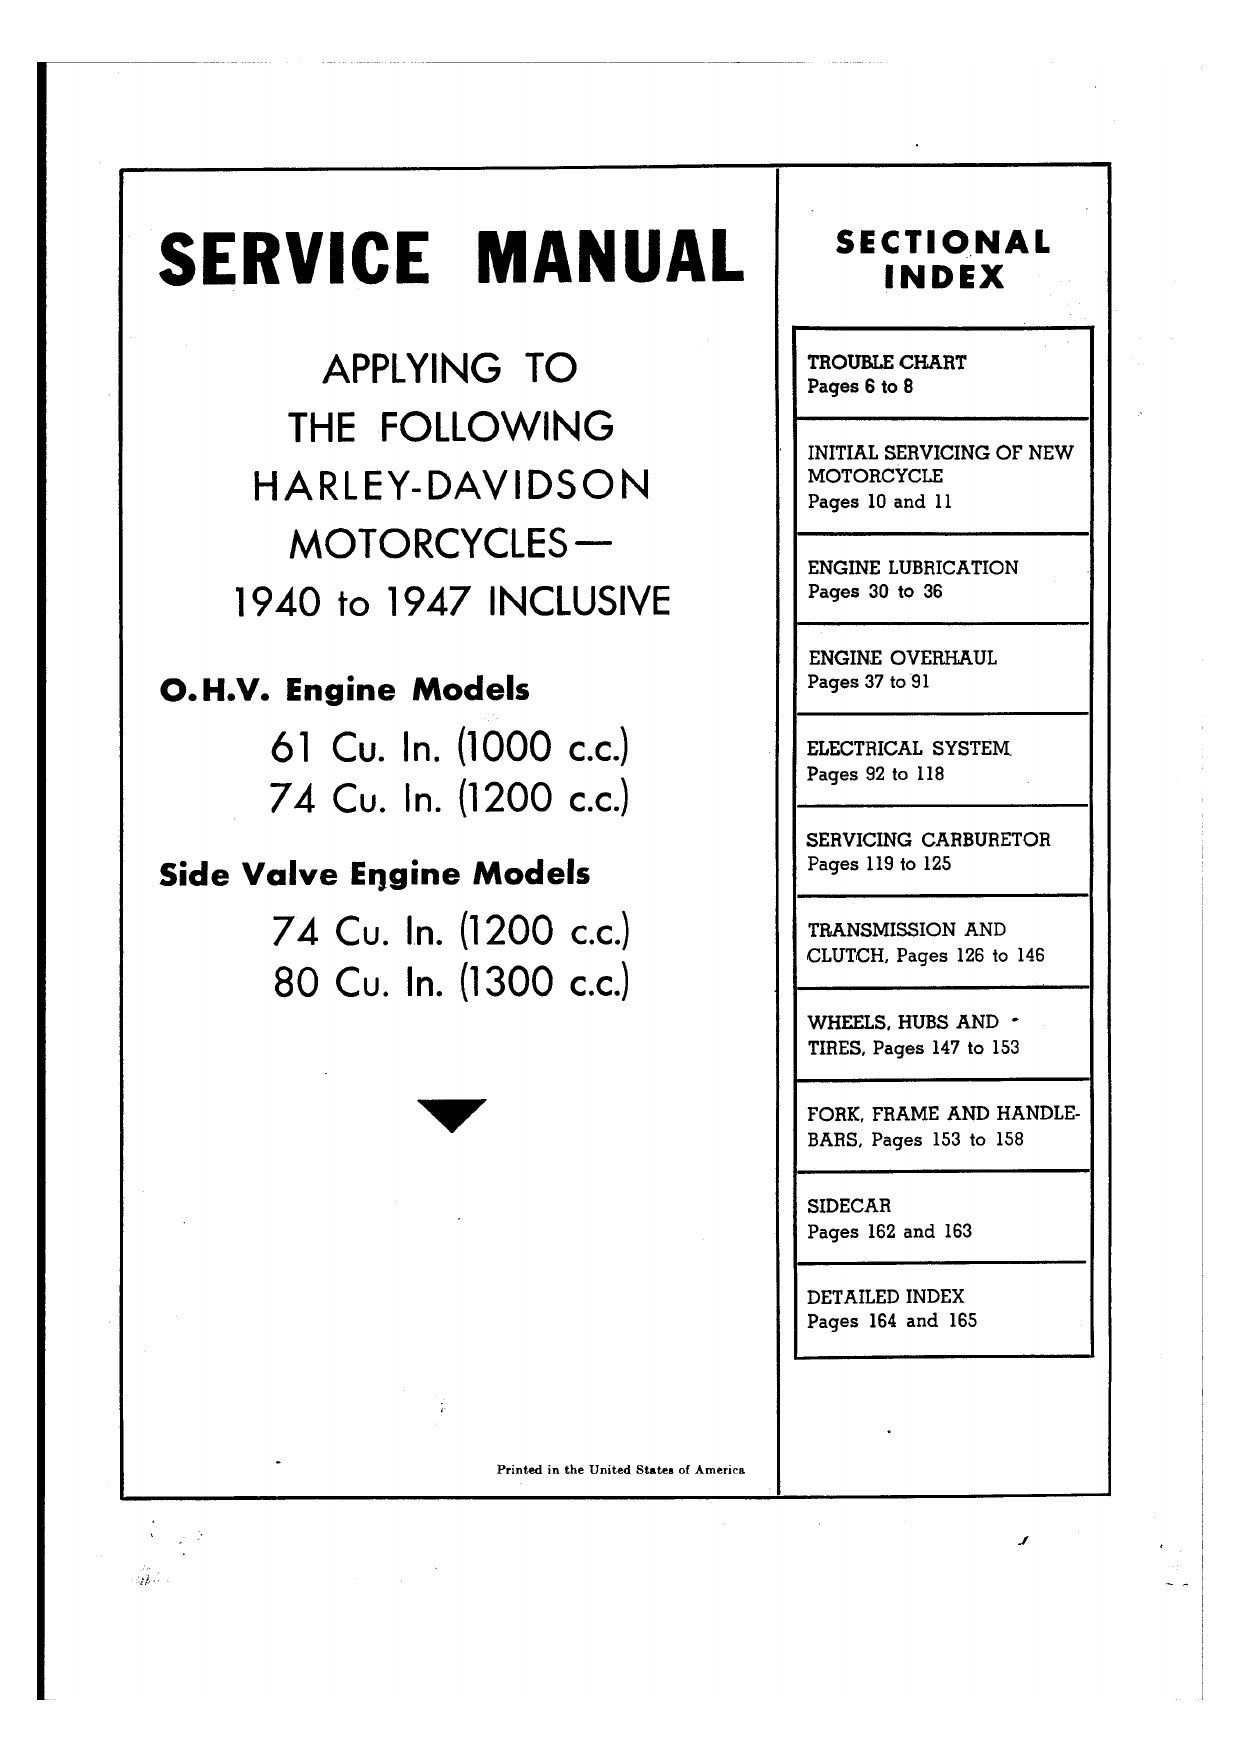 1940-1947 Harley-Davidson Knucklehead, Flathead service manual Preview image 6